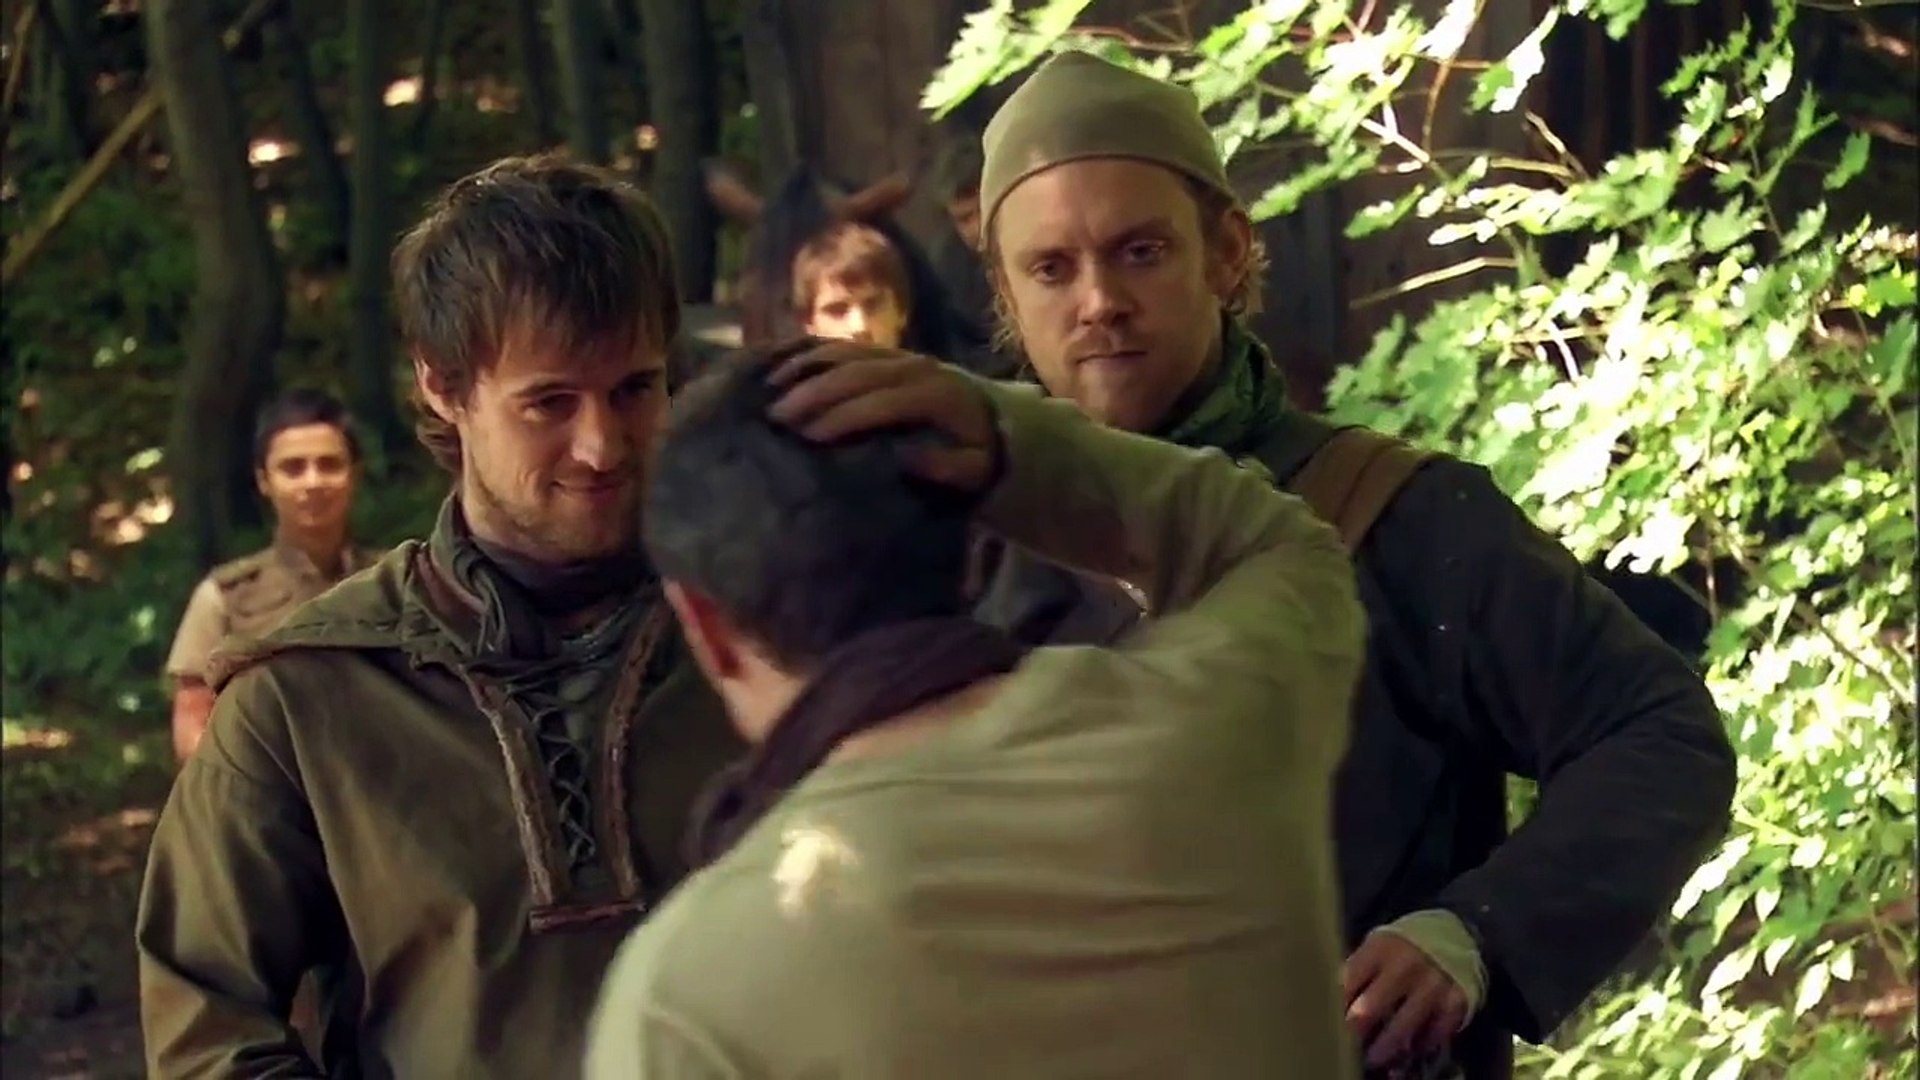 Robin Hood S01E07 Brothers in Arms - video Dailymotion